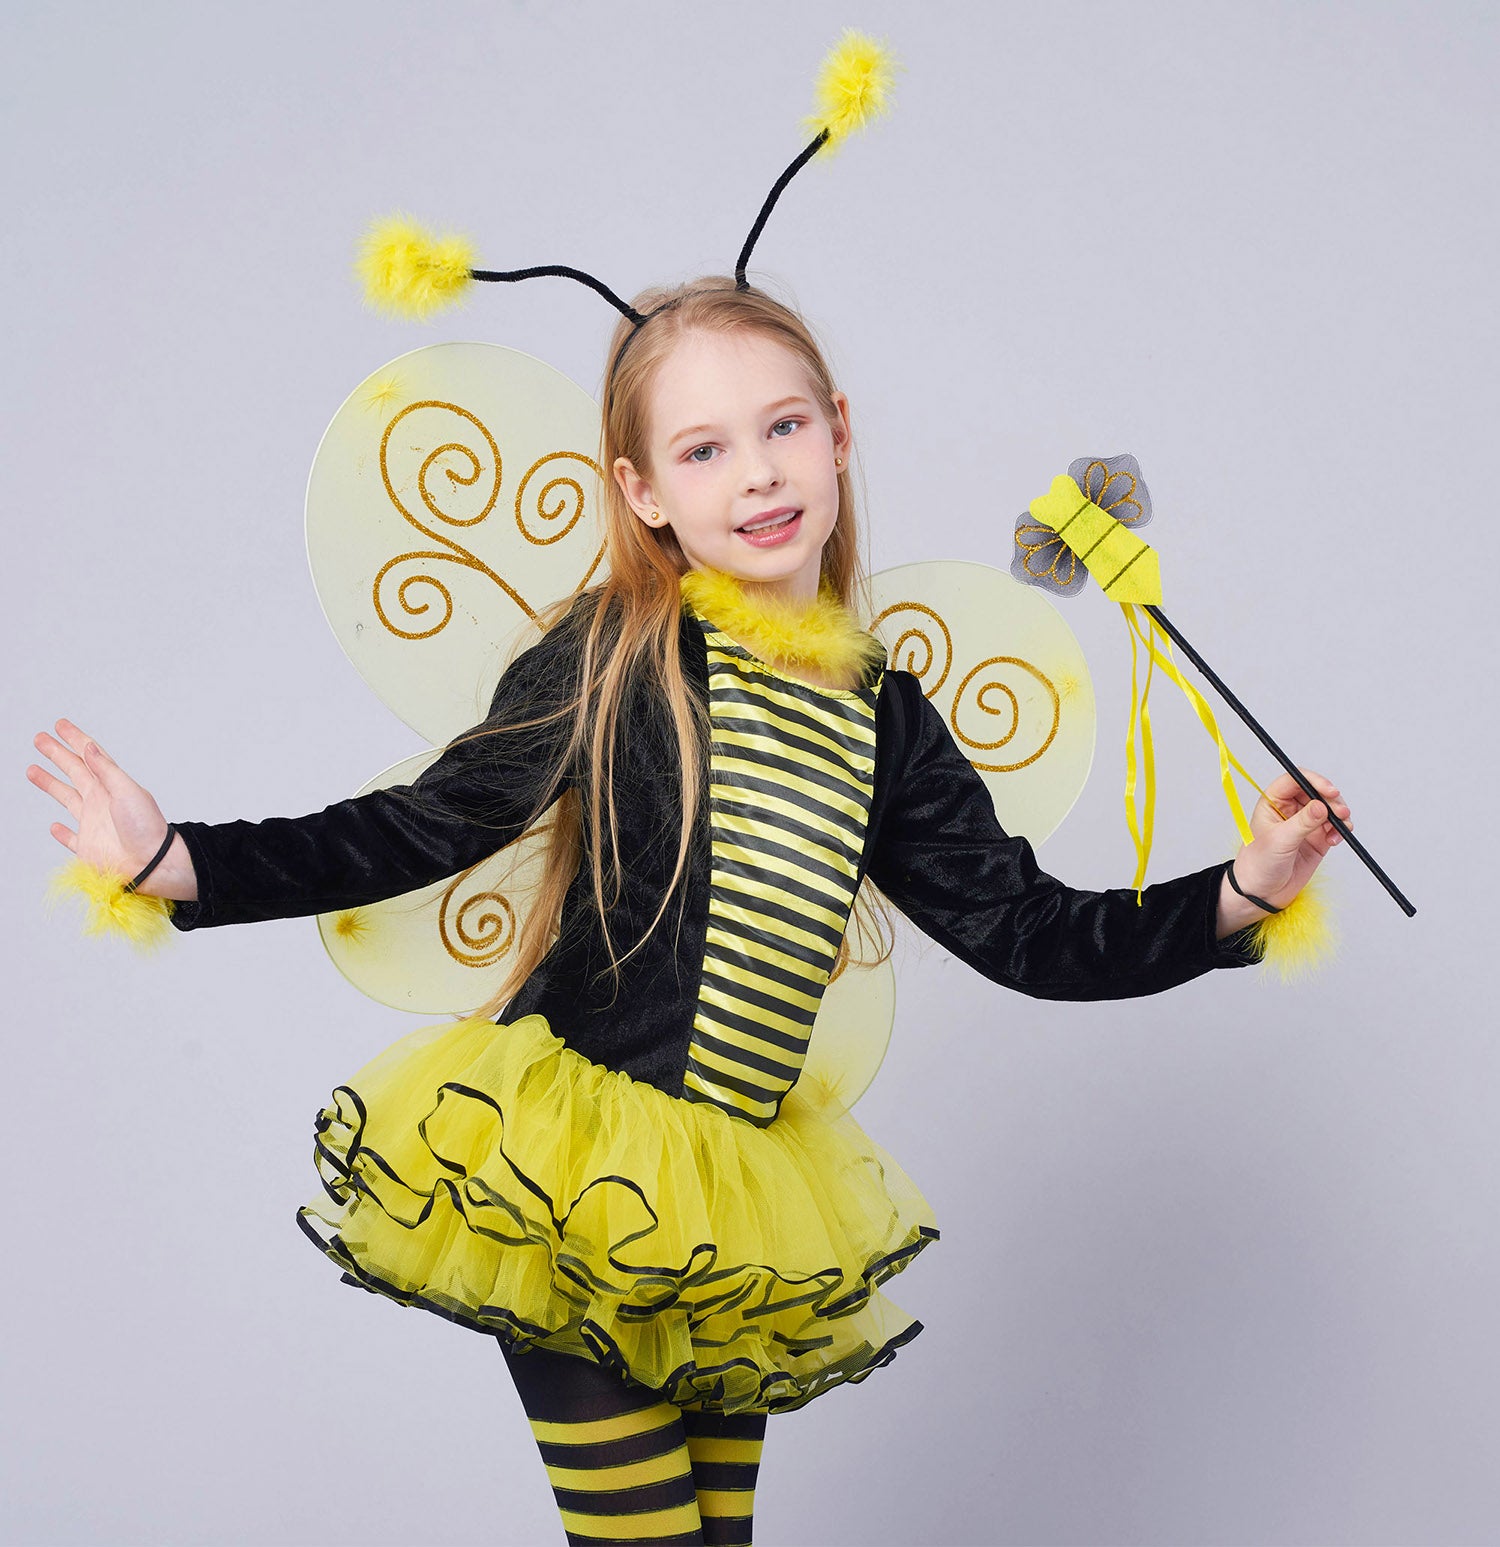 IKALI Girls Bee Costume Deluxe Animal Fancy Dress Outfit with Wings (10pcs Set) 7-8Y